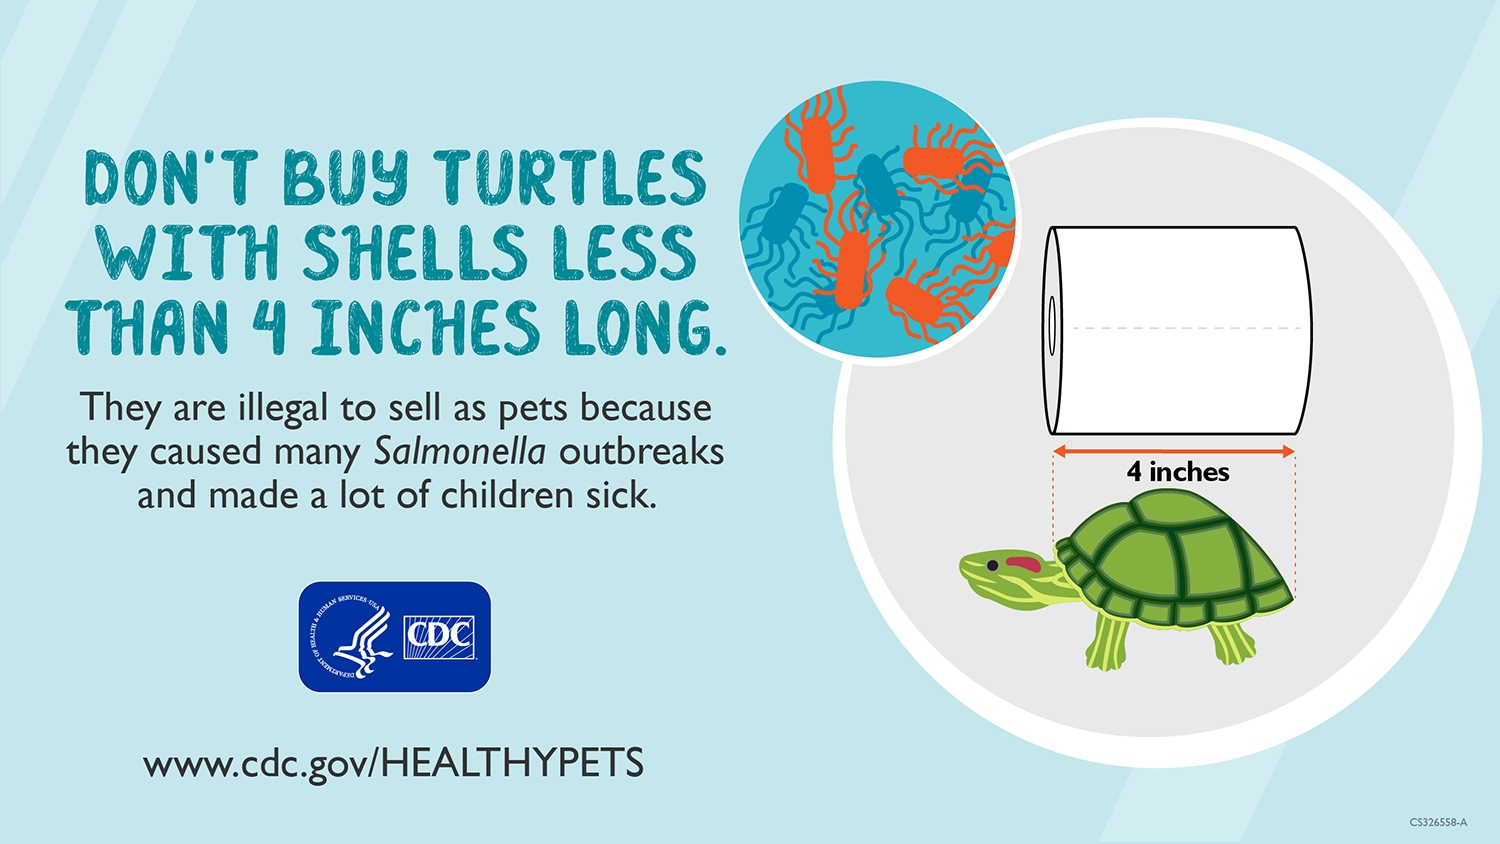 Don't buy turtles less than 4 inches long